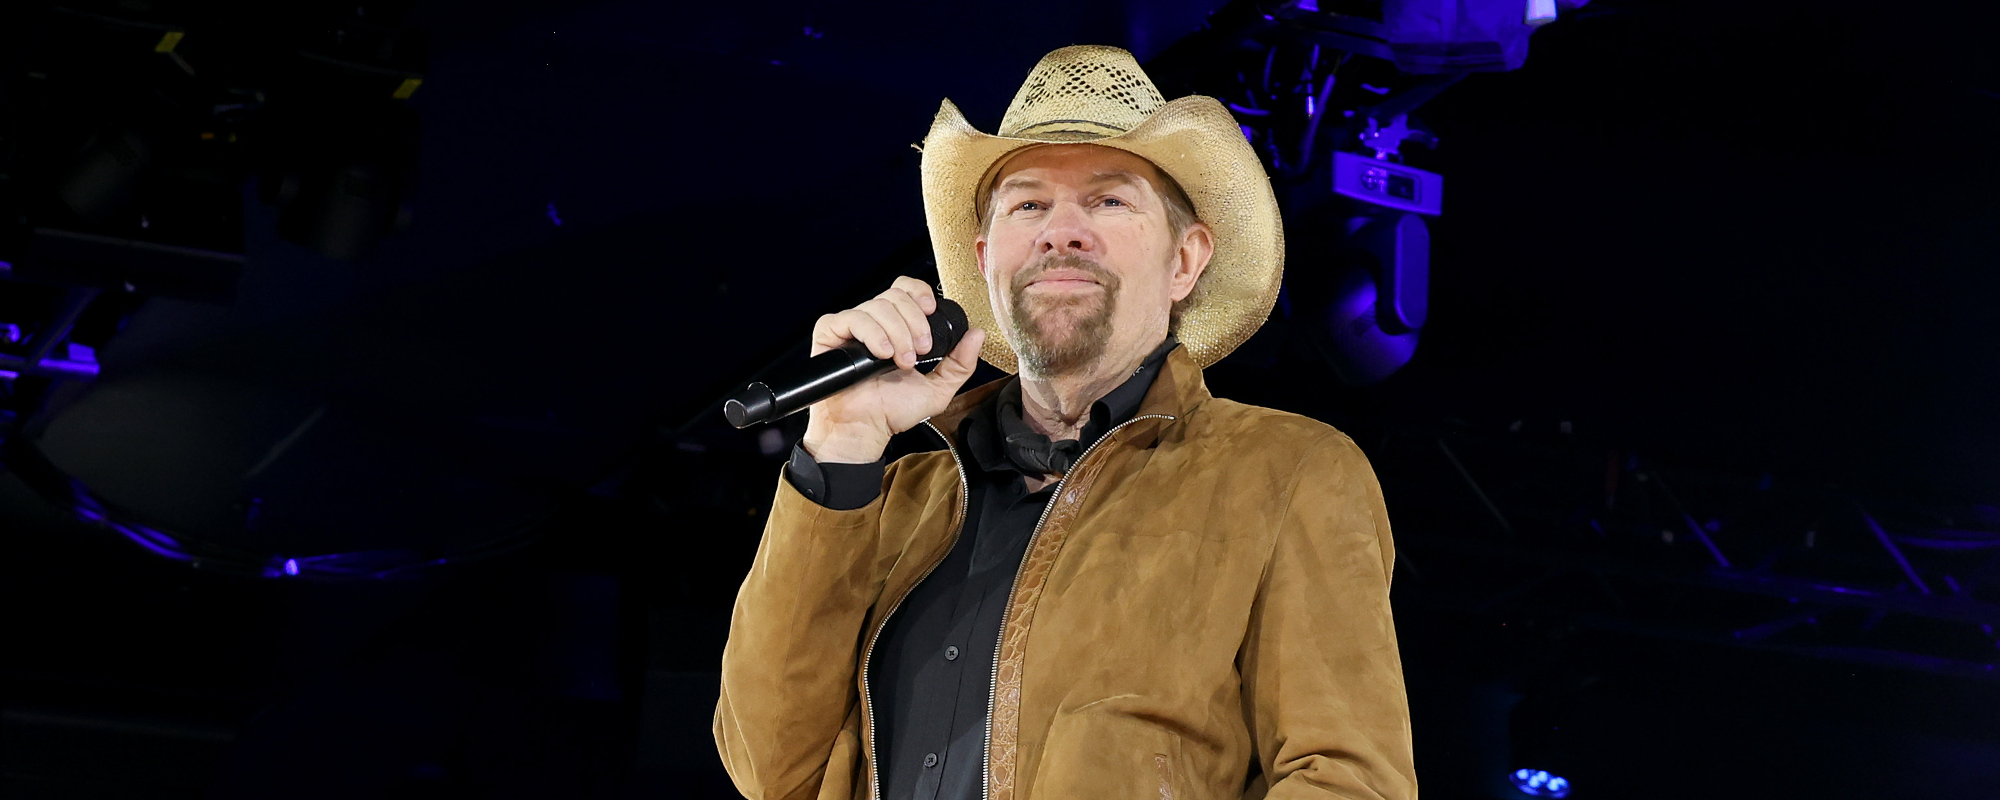 Fans Flood Toby Keith’s Family Christmas Post With Outpouring of Love & Prayers for Good Health